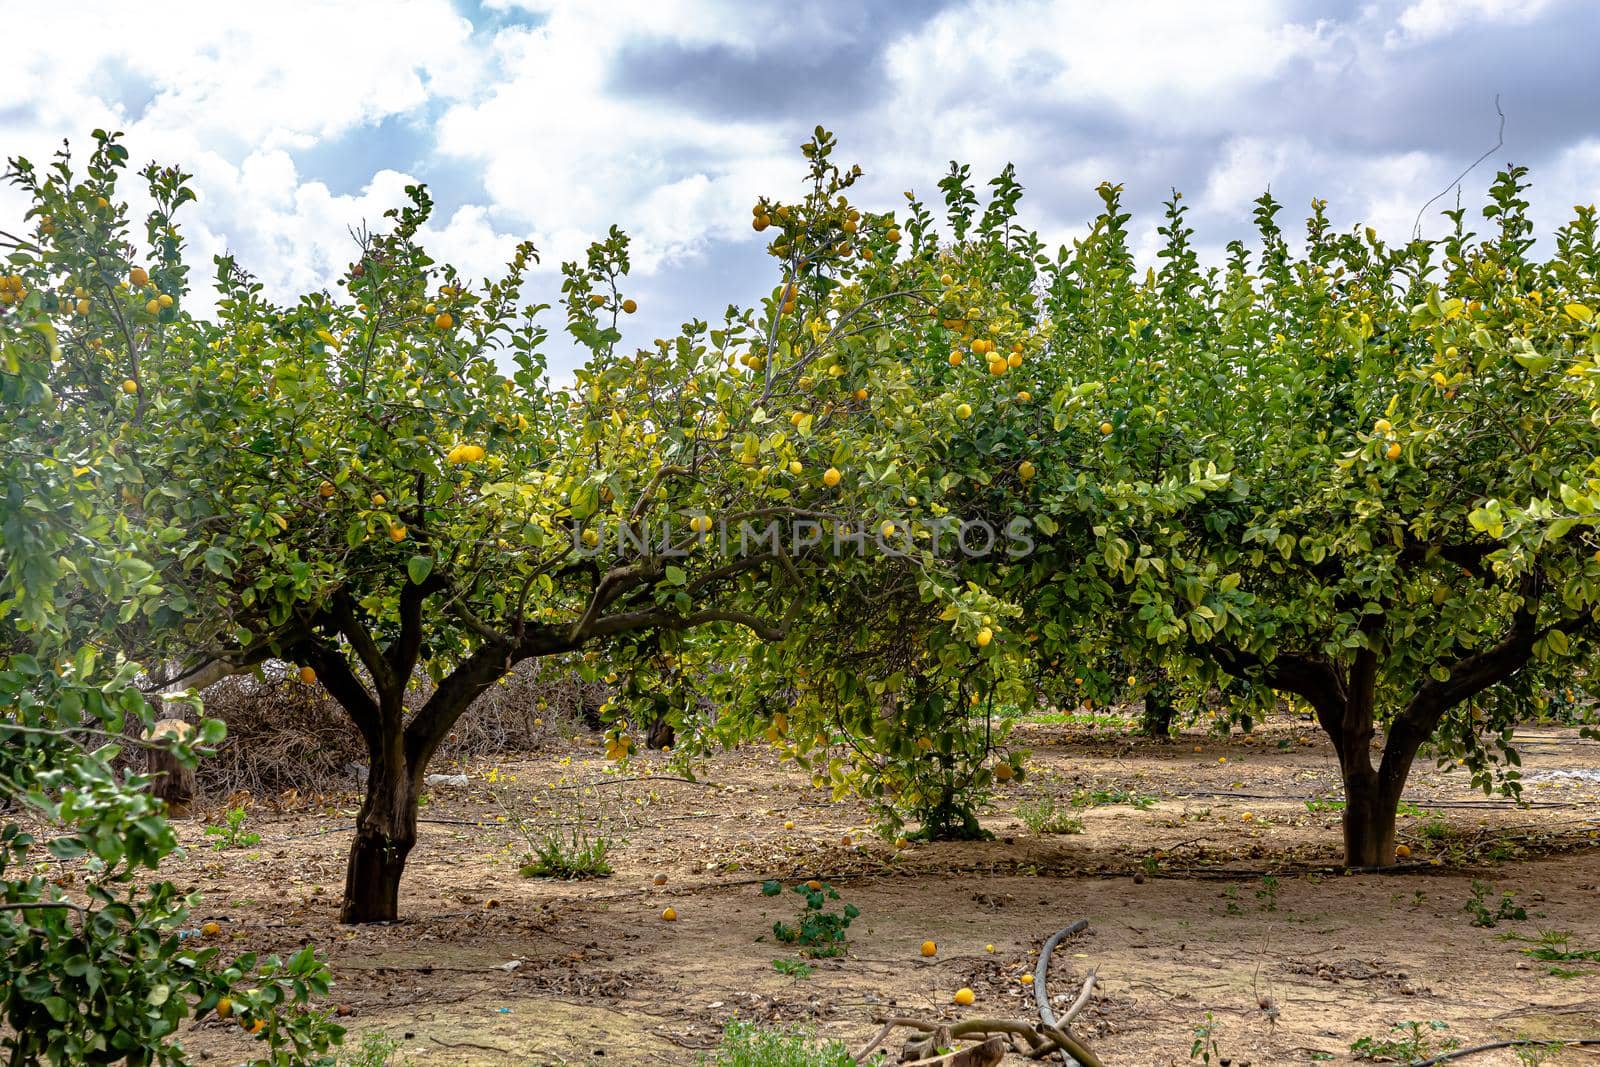 Ripe lemons hanging on a tree. Growing a lemon. Mature lemons on tree. Selective focus and close up by Milanchikov